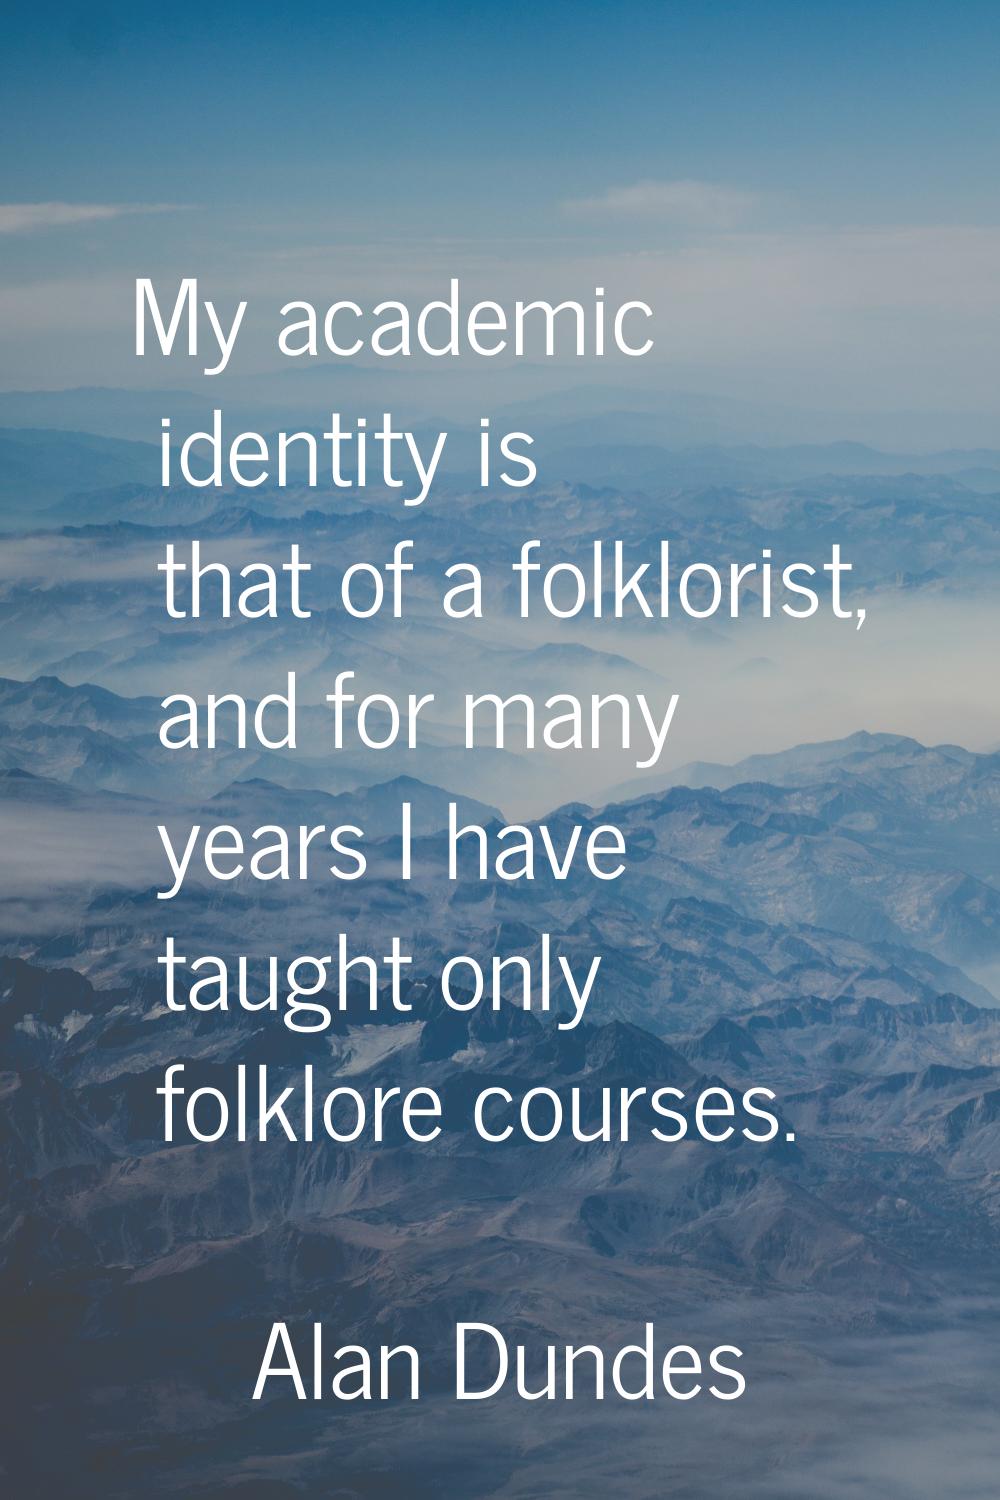 My academic identity is that of a folklorist, and for many years I have taught only folklore course